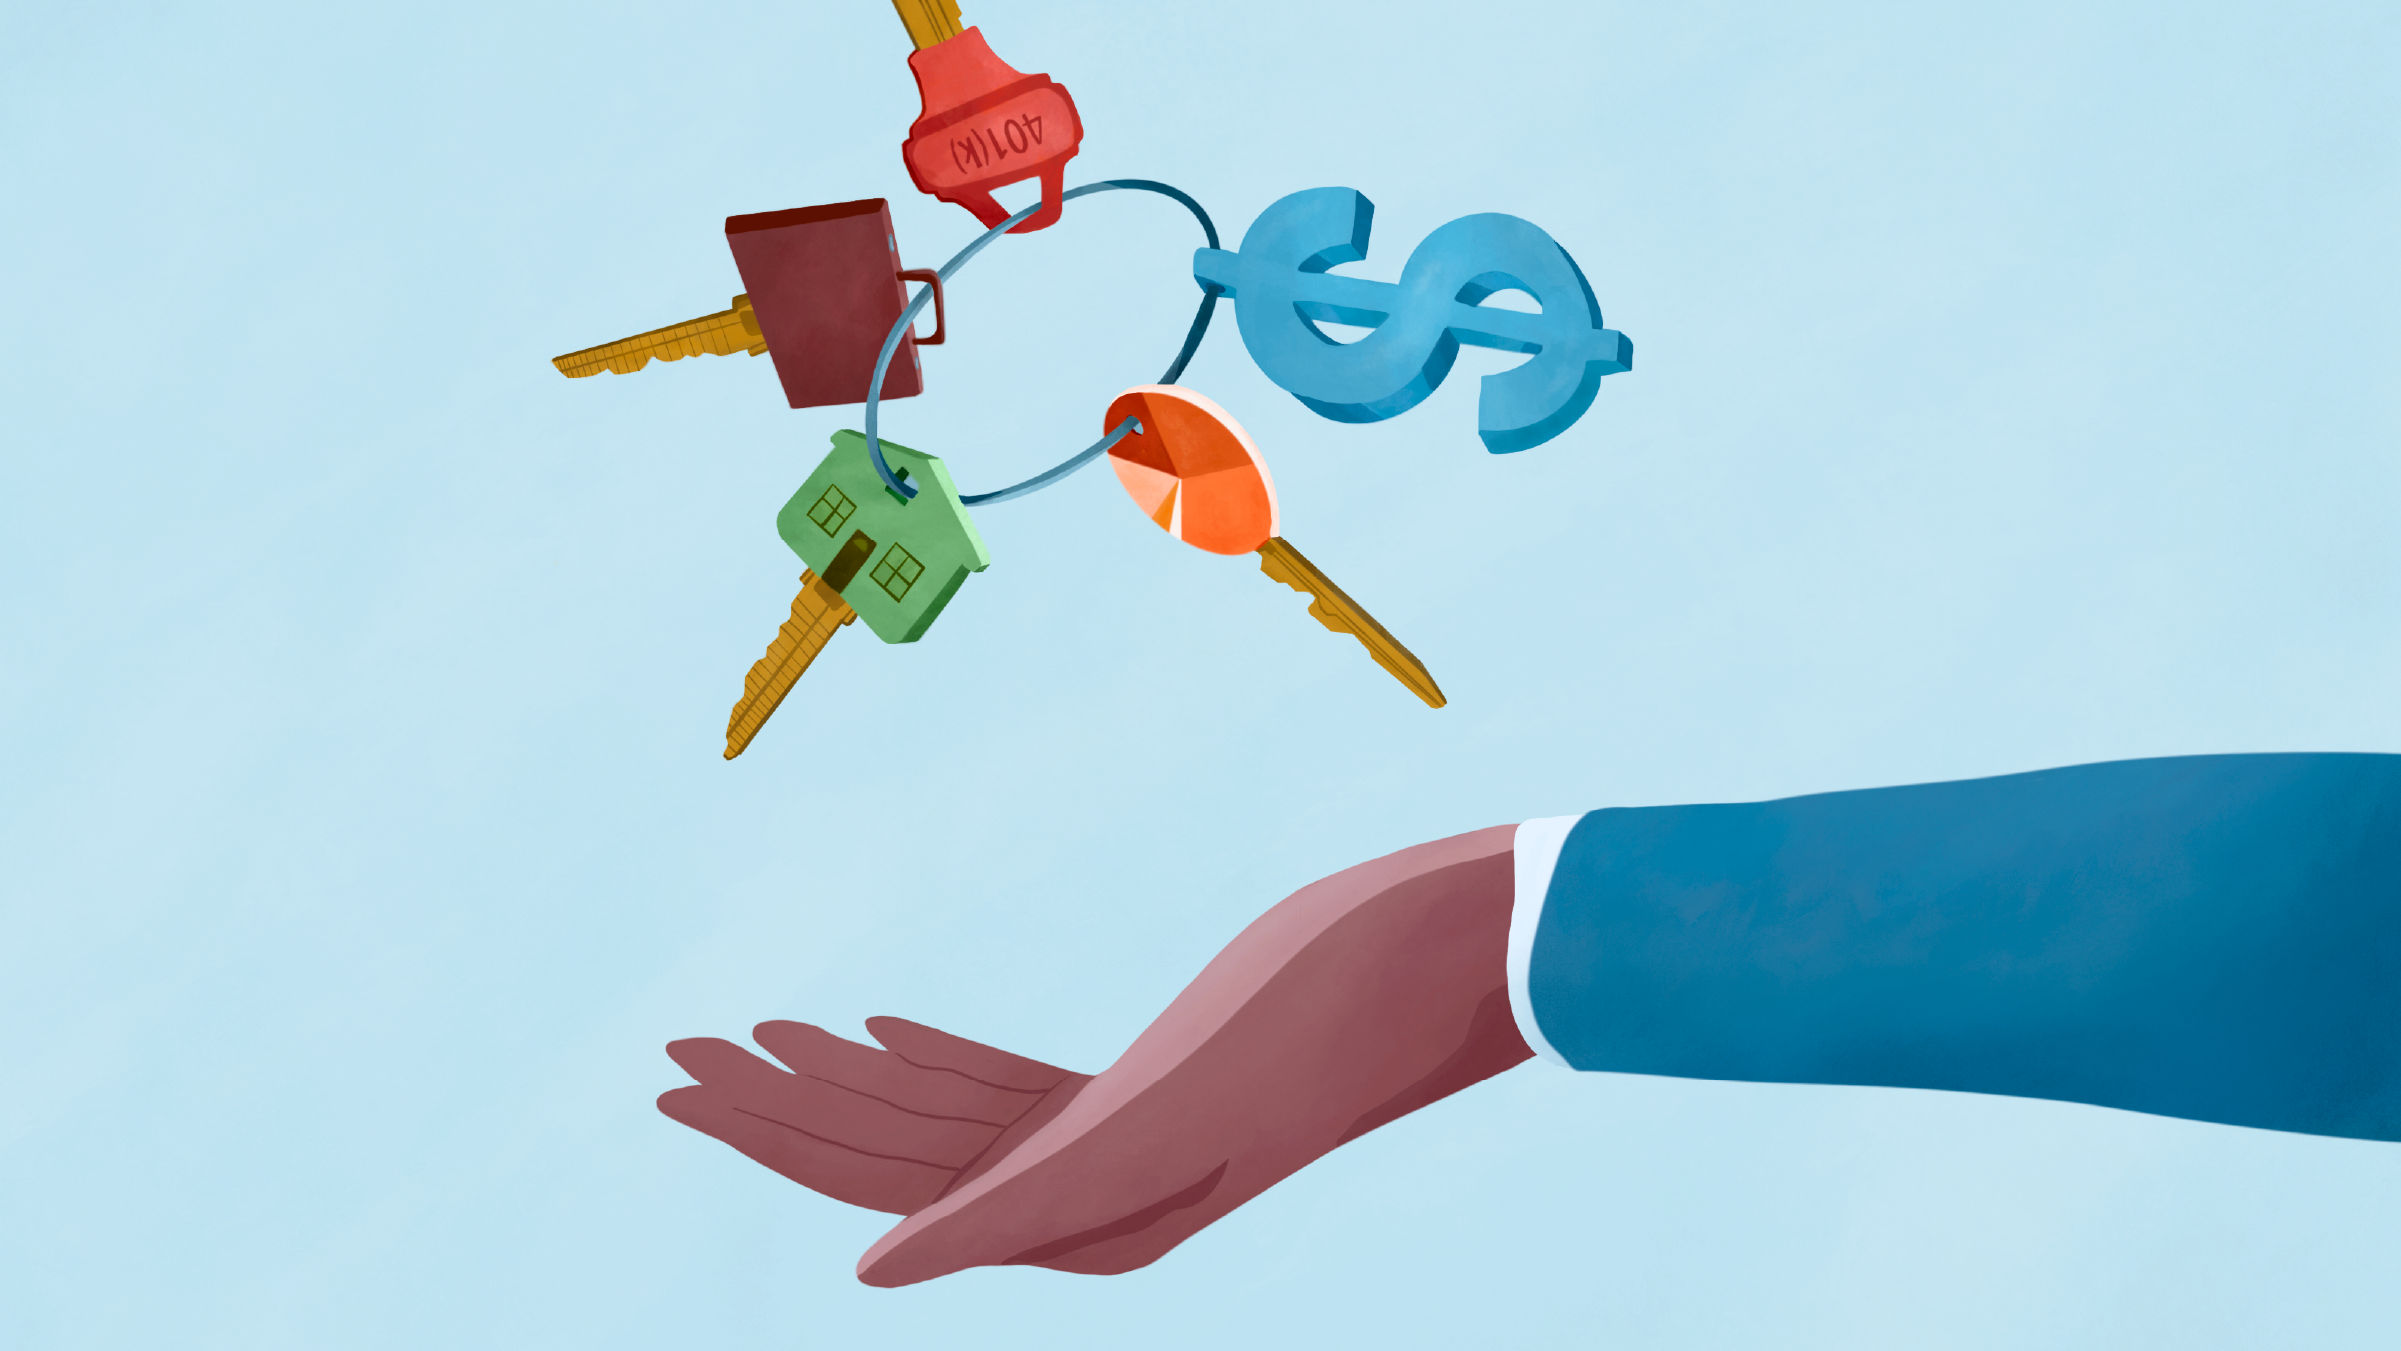 An illustration capturing the moment keys, each representing a rule of thumb, gently falling onto the open palm of an investor.